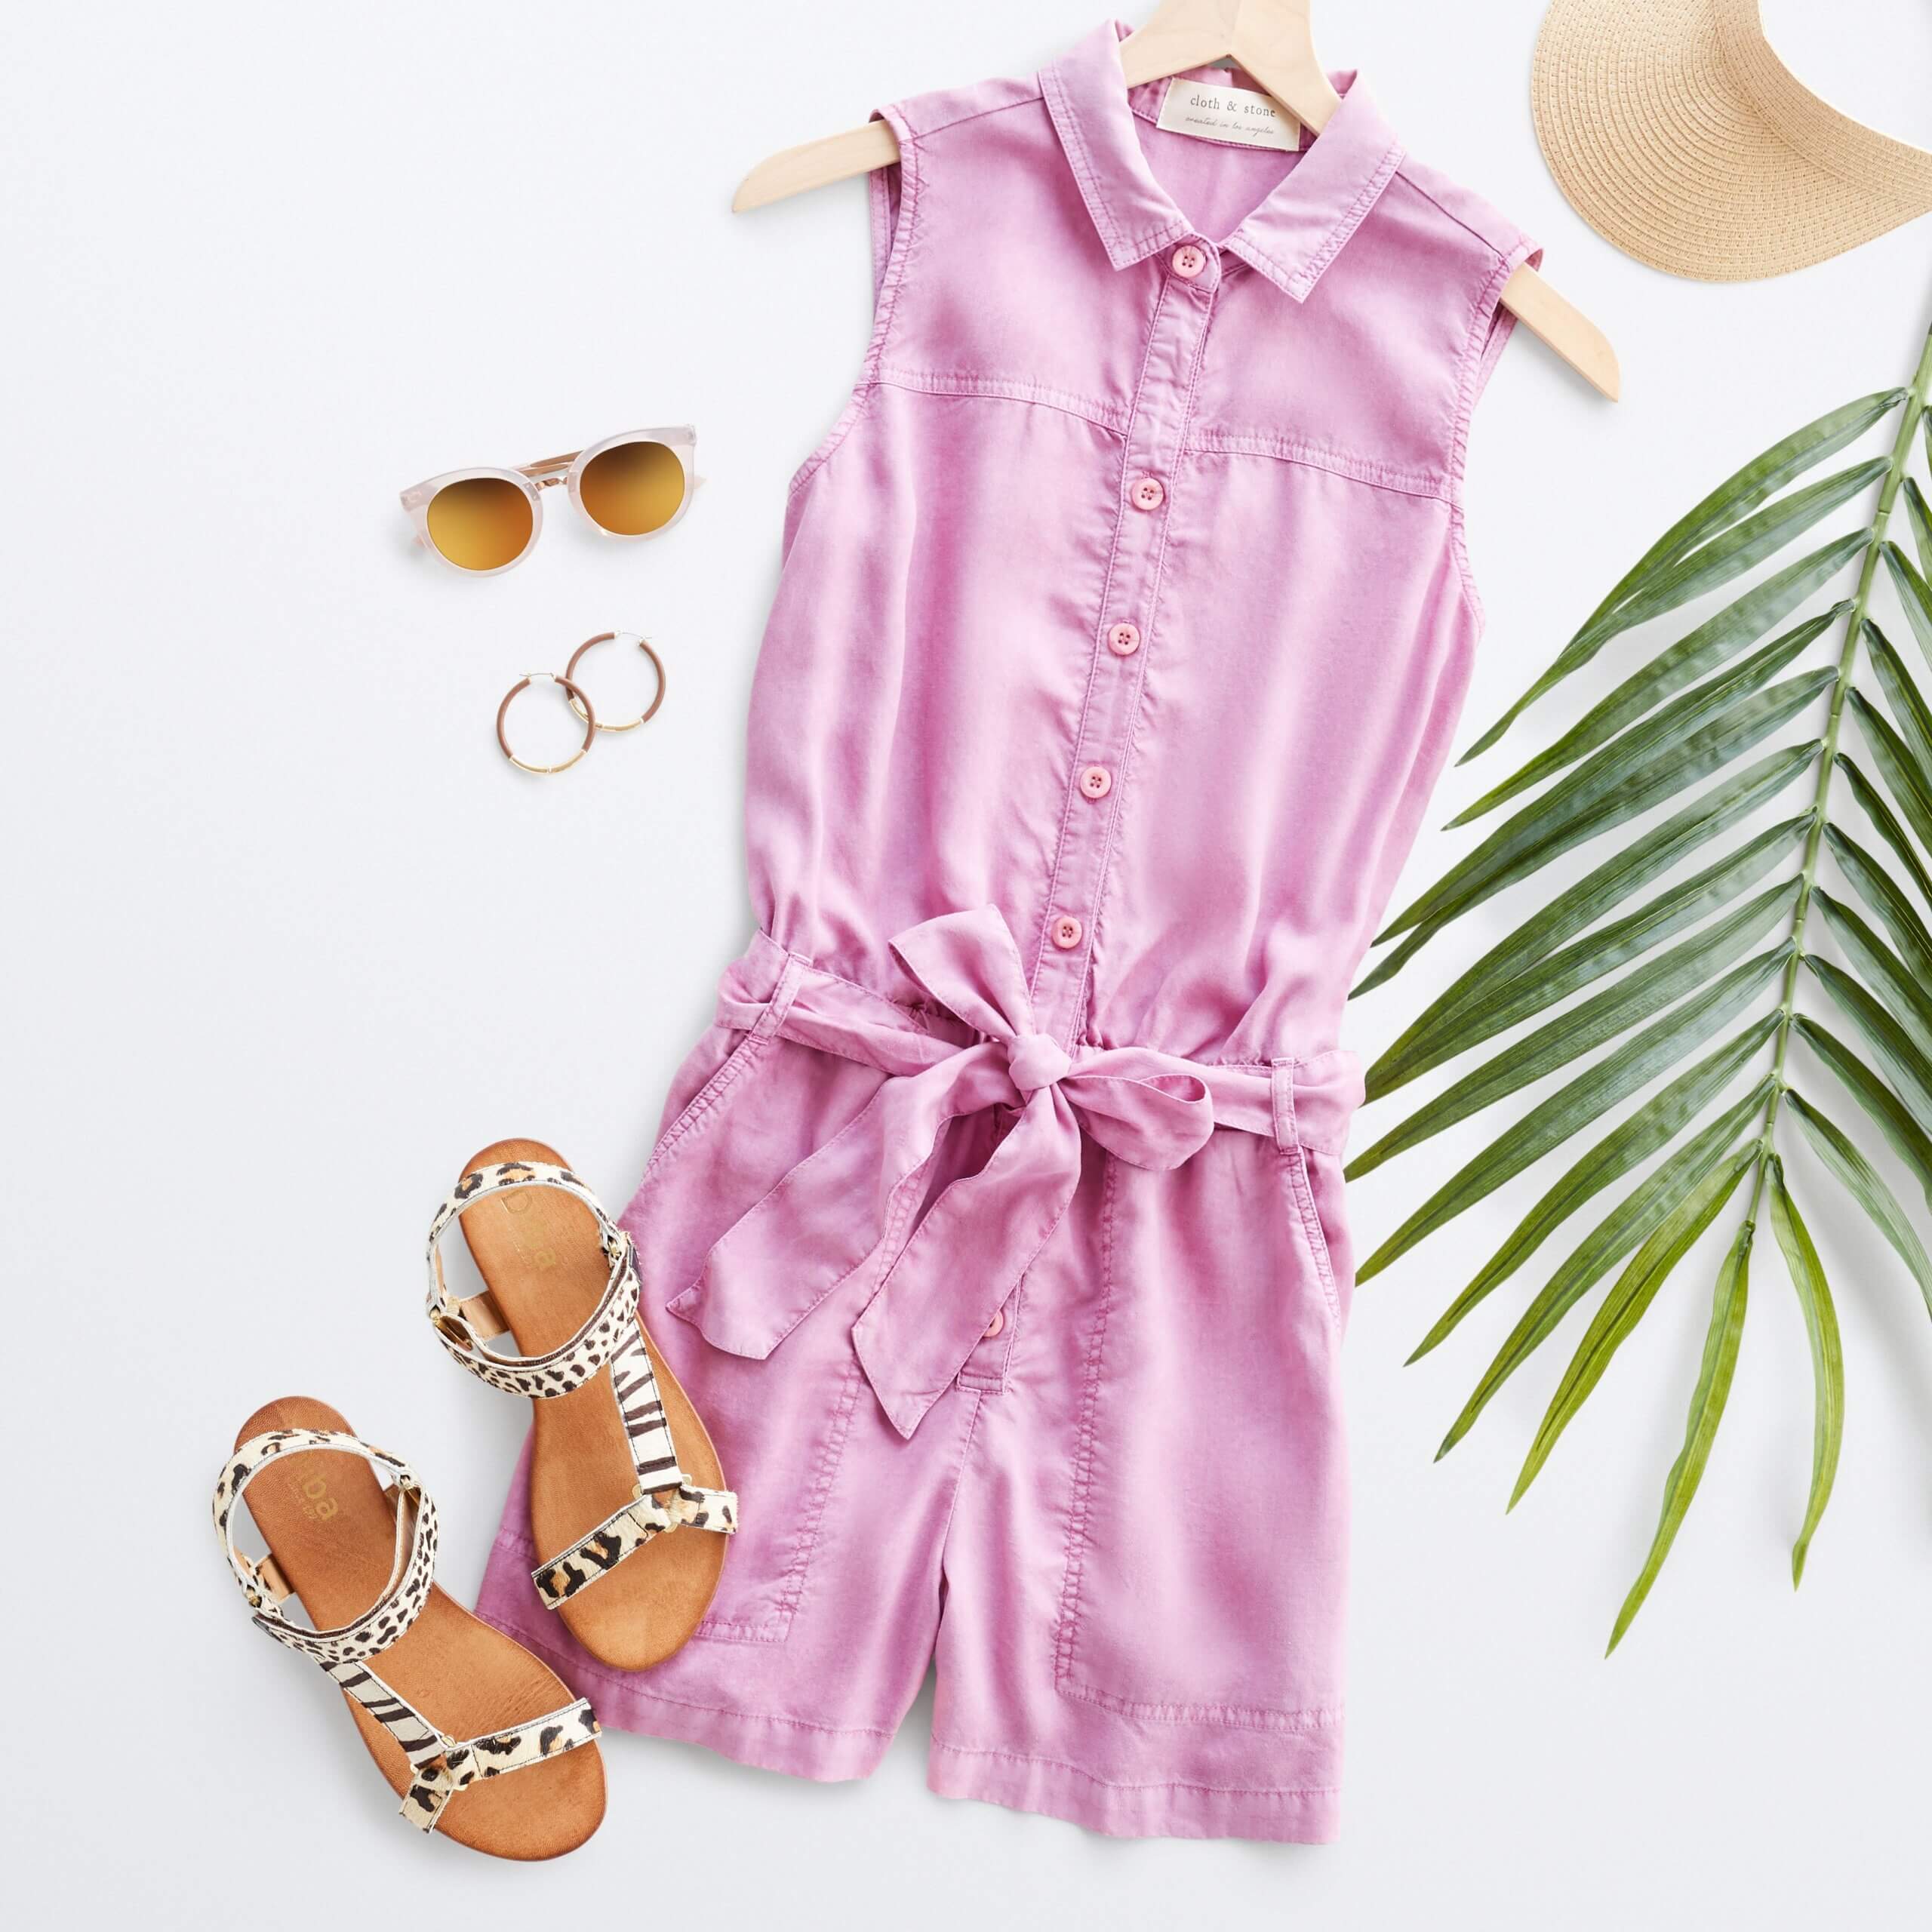 Stitch Fix women's outfit laydown featuring pink collared romper with button-front and tie-waist detail next to brown animal-print sandals and gold hoop earrings. 